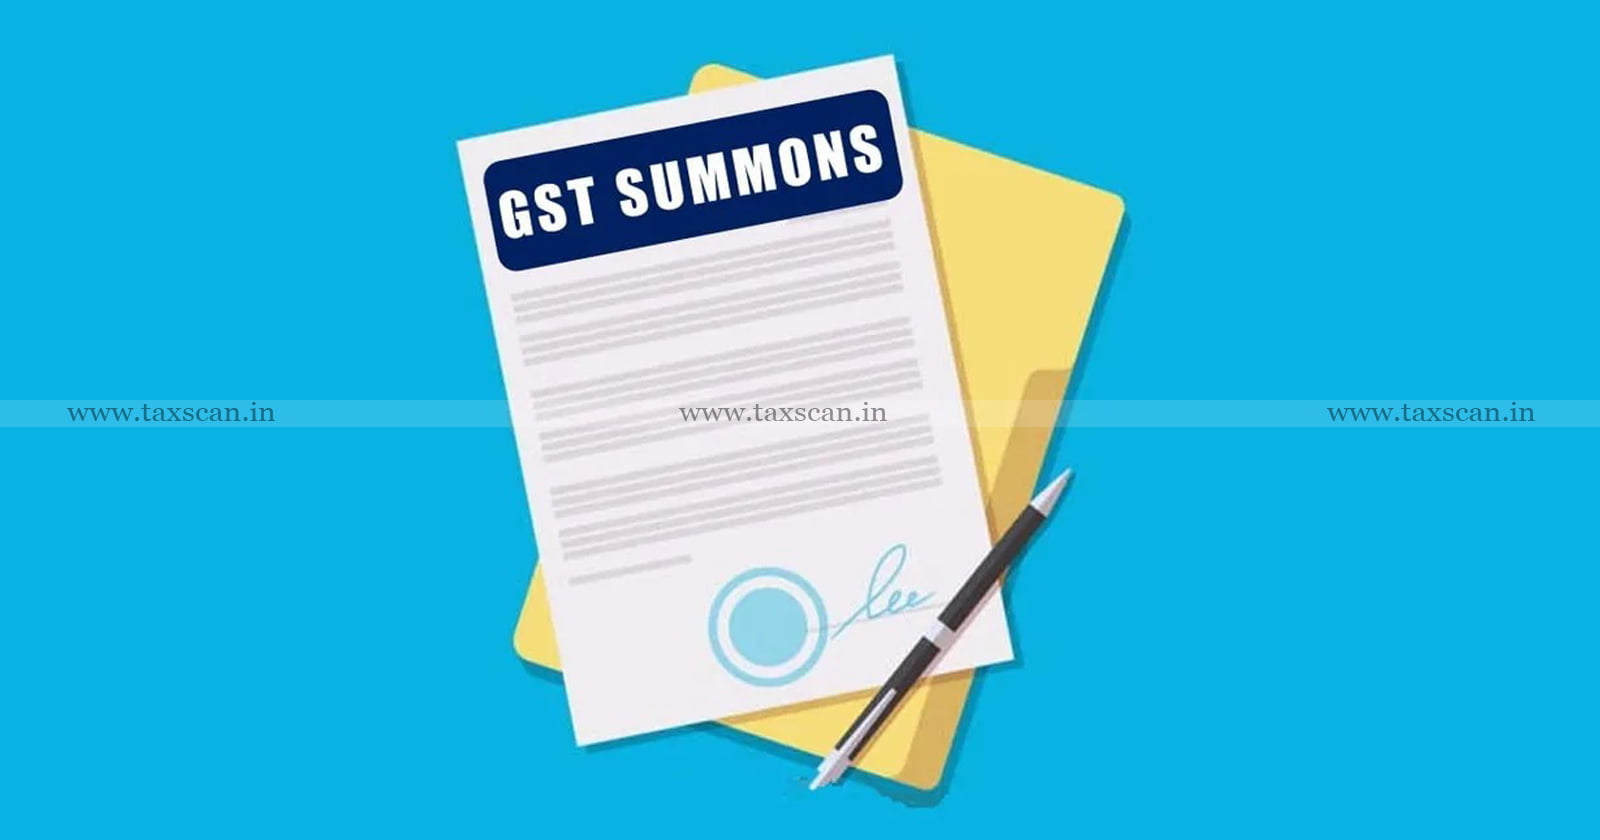 Department - summon - summon of Party - GST Payments - Andhra Pradesh High Court - taxscan